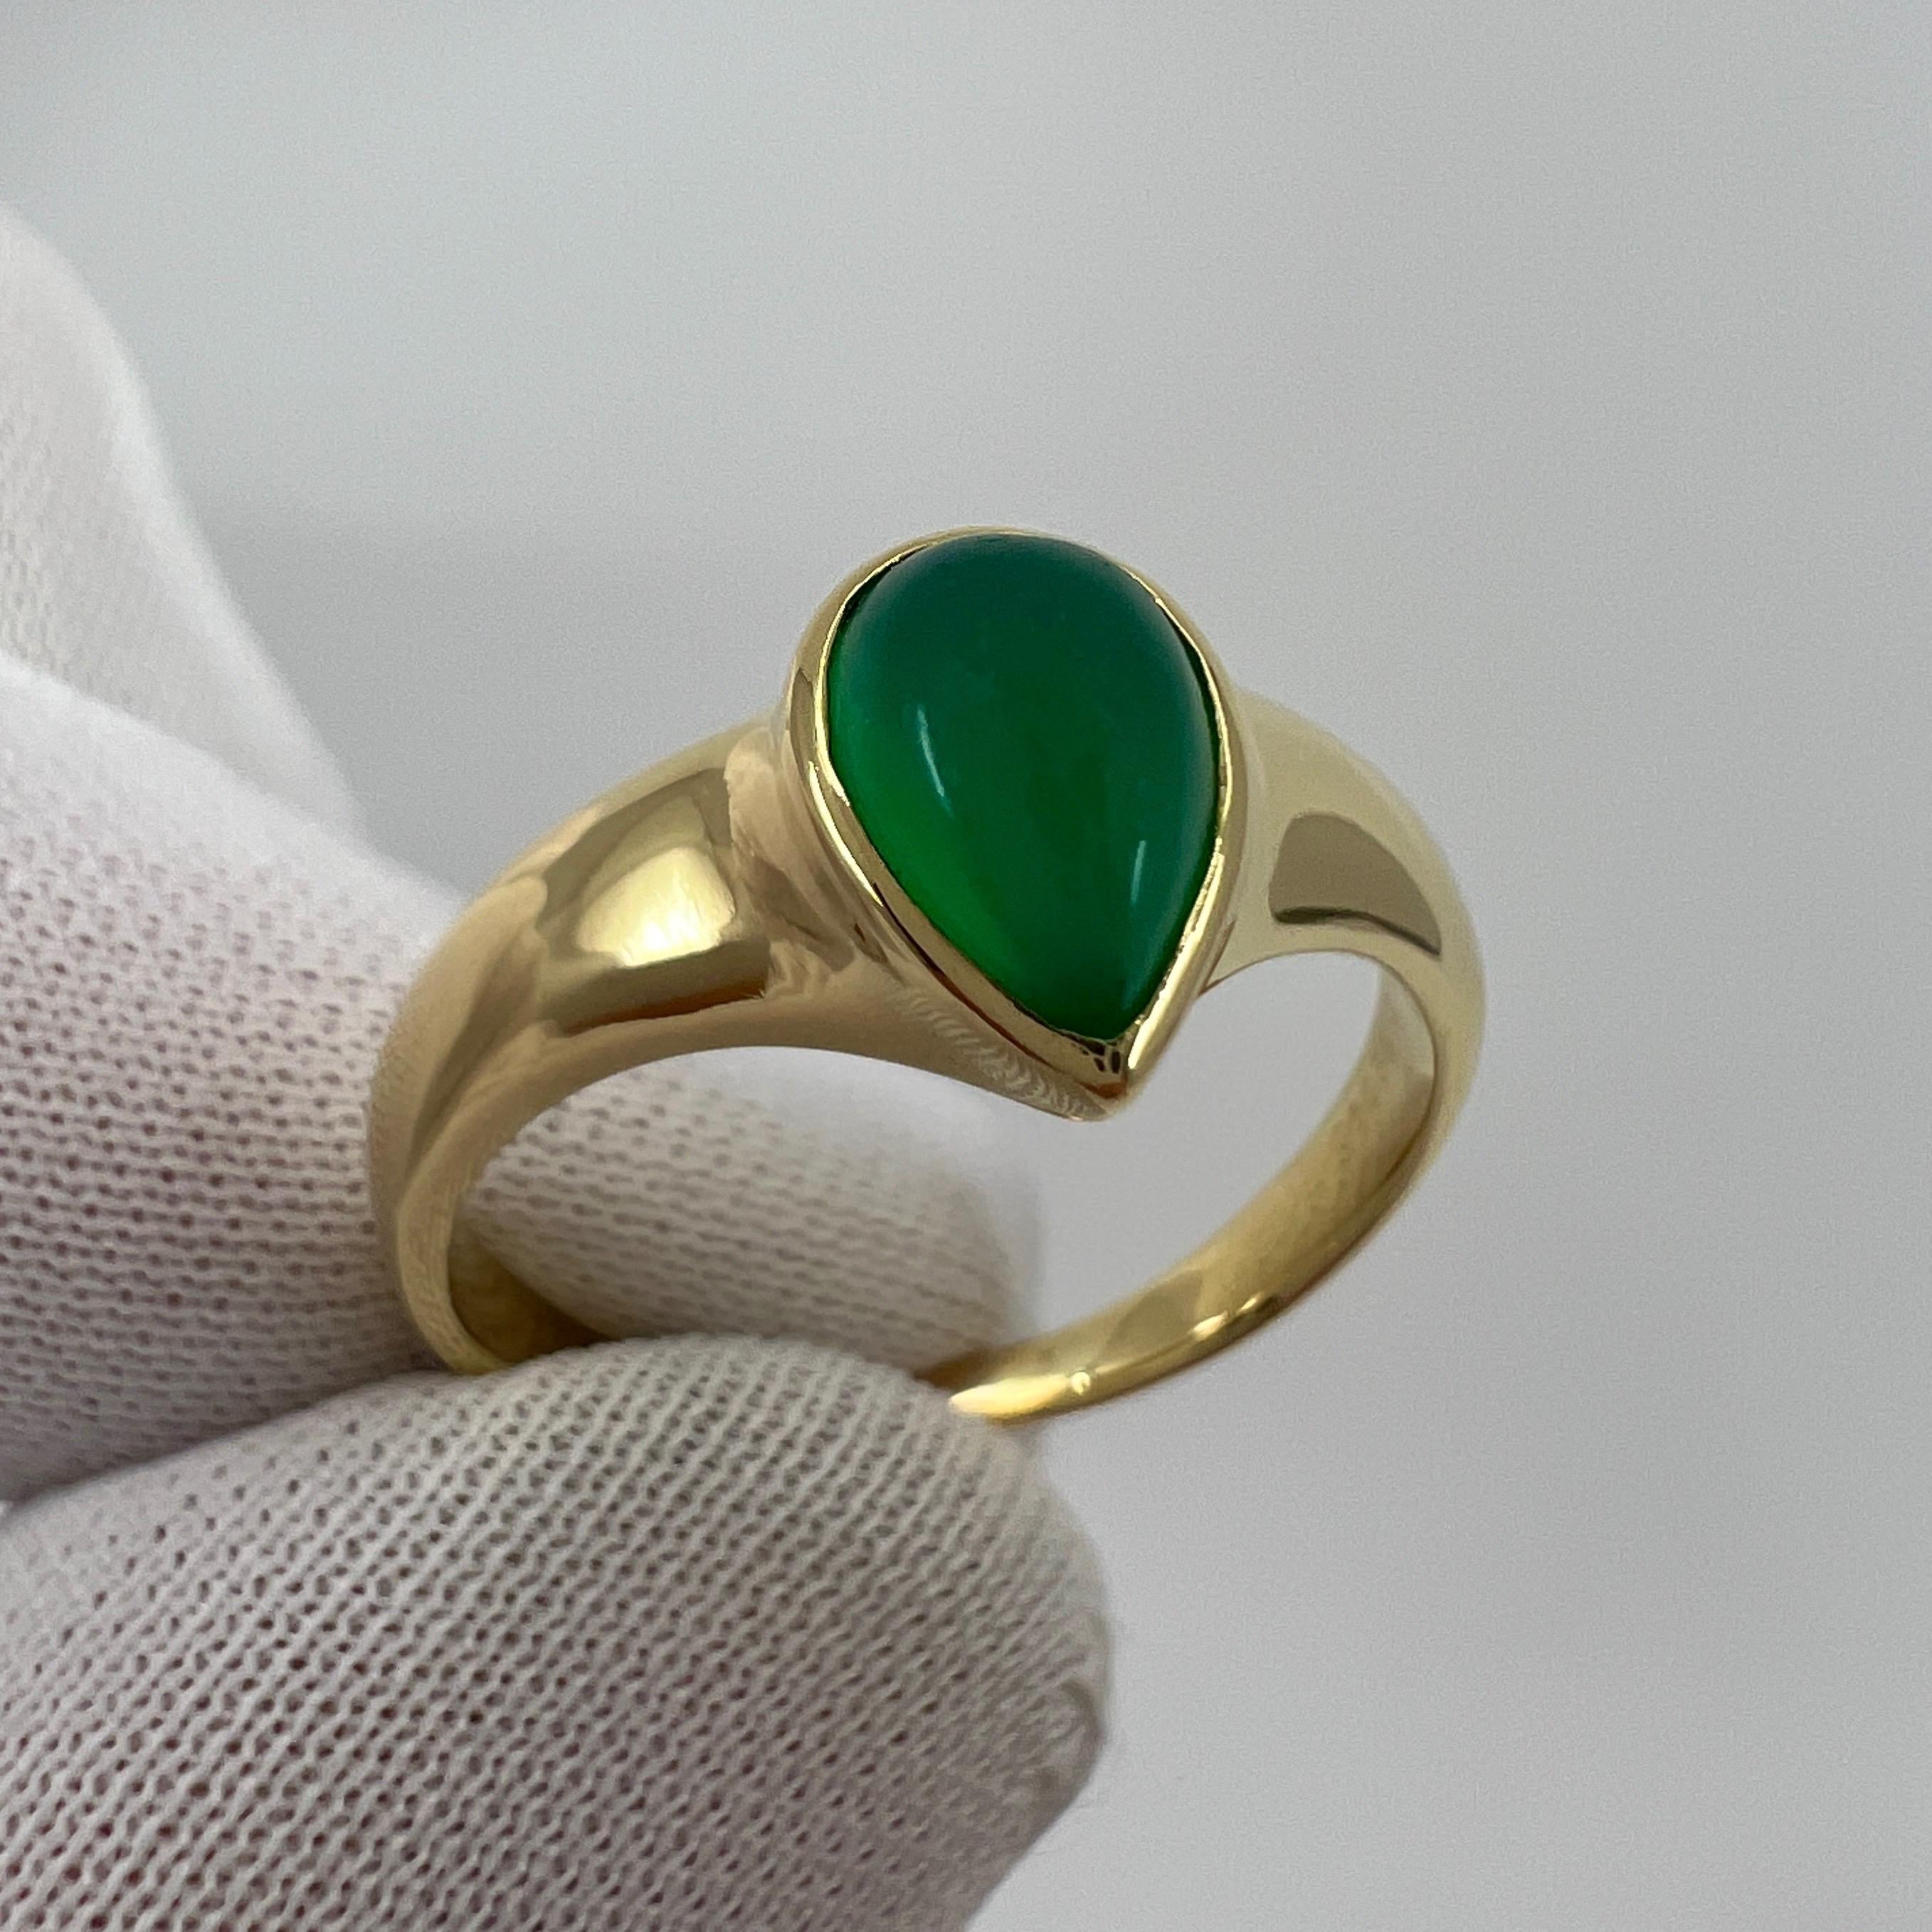 Rare Vintage Van Cleef & Arpels Green Chalcedony Pear Cut 18k Yellow Gold Ring For Sale 4